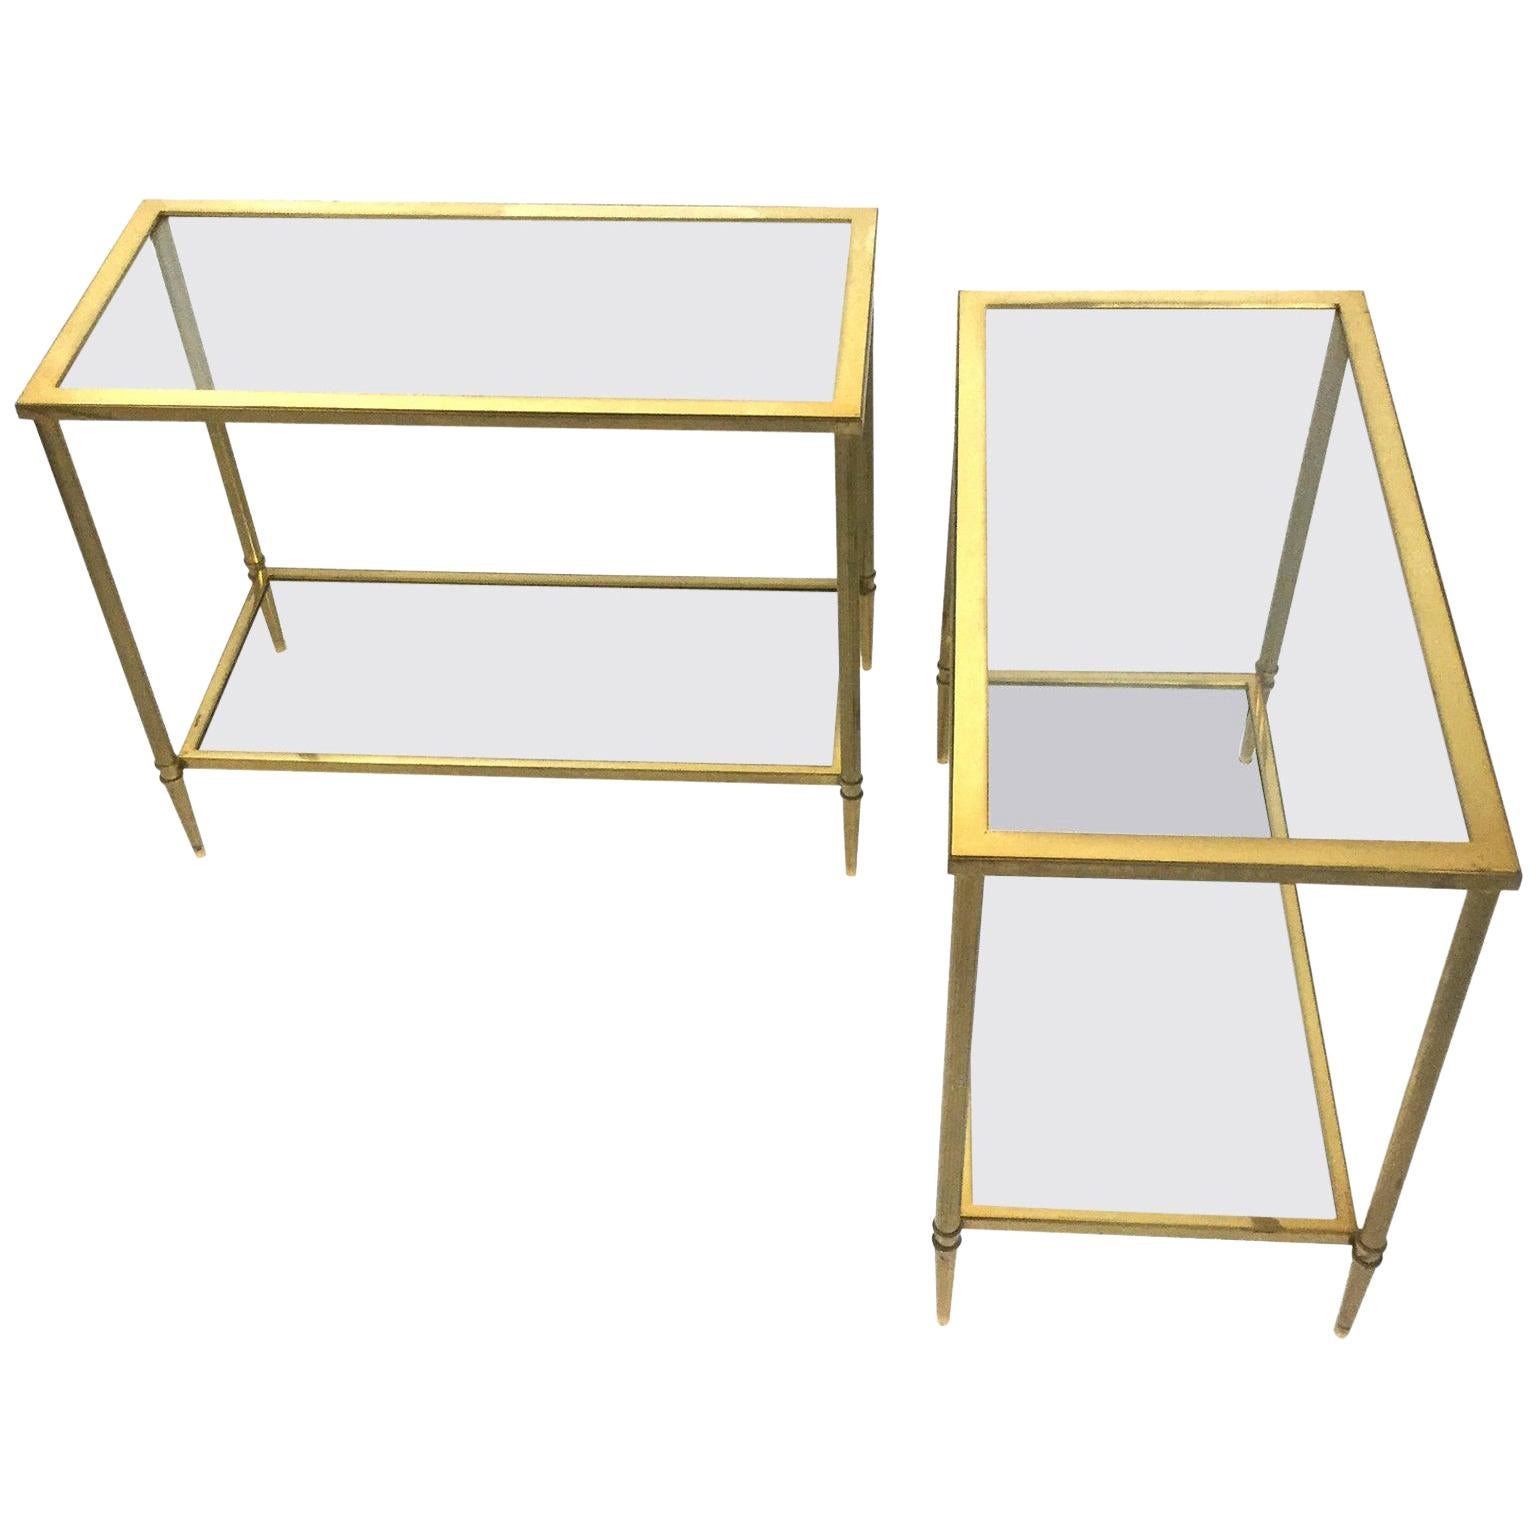 Pair of Brass Console Tables Attributed to Maison Jansen, France, 1970s